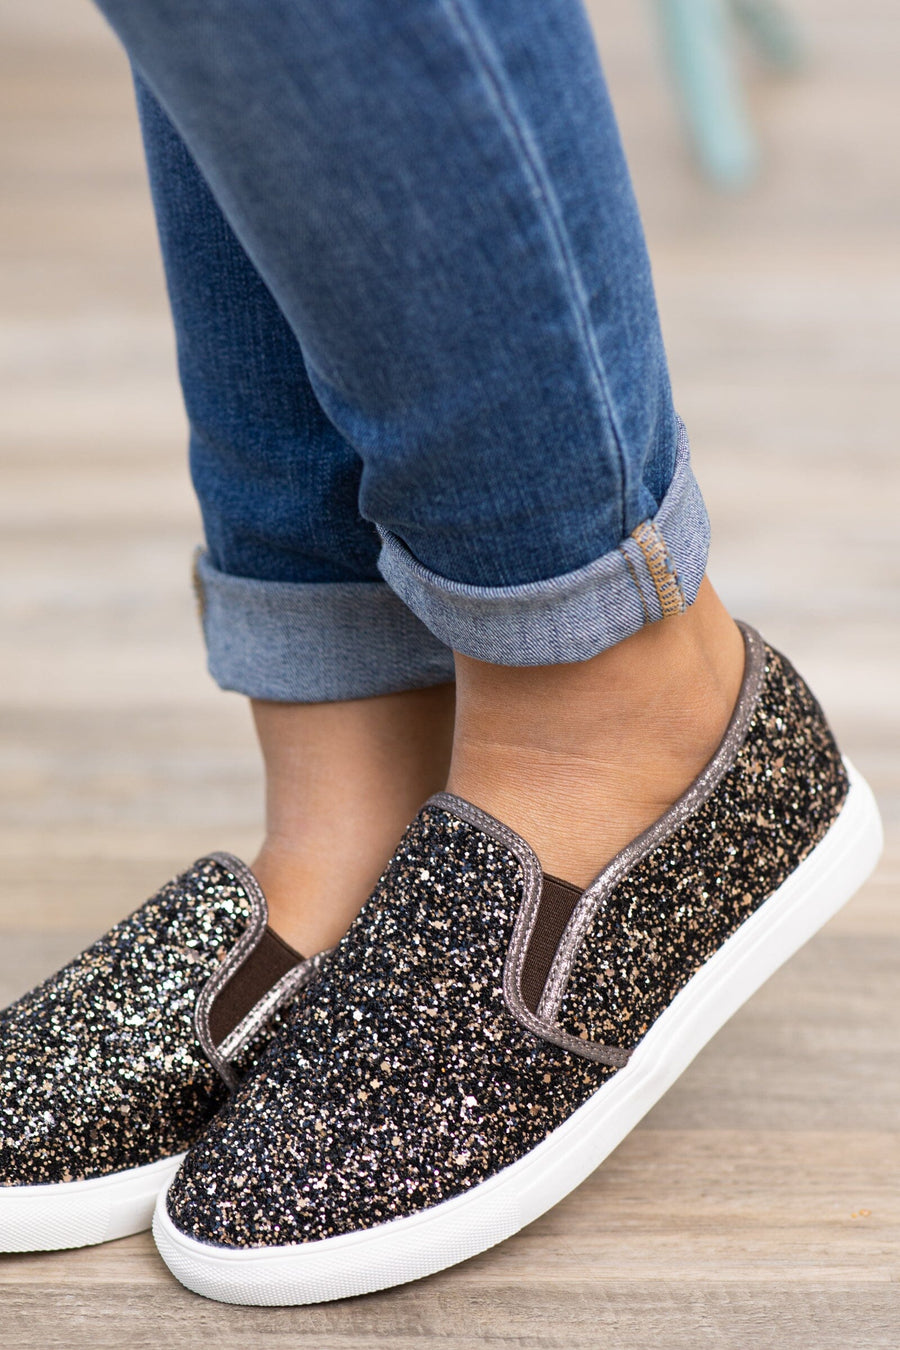 Black and Gold Glitter Slip On Sneakers - Filly Flair